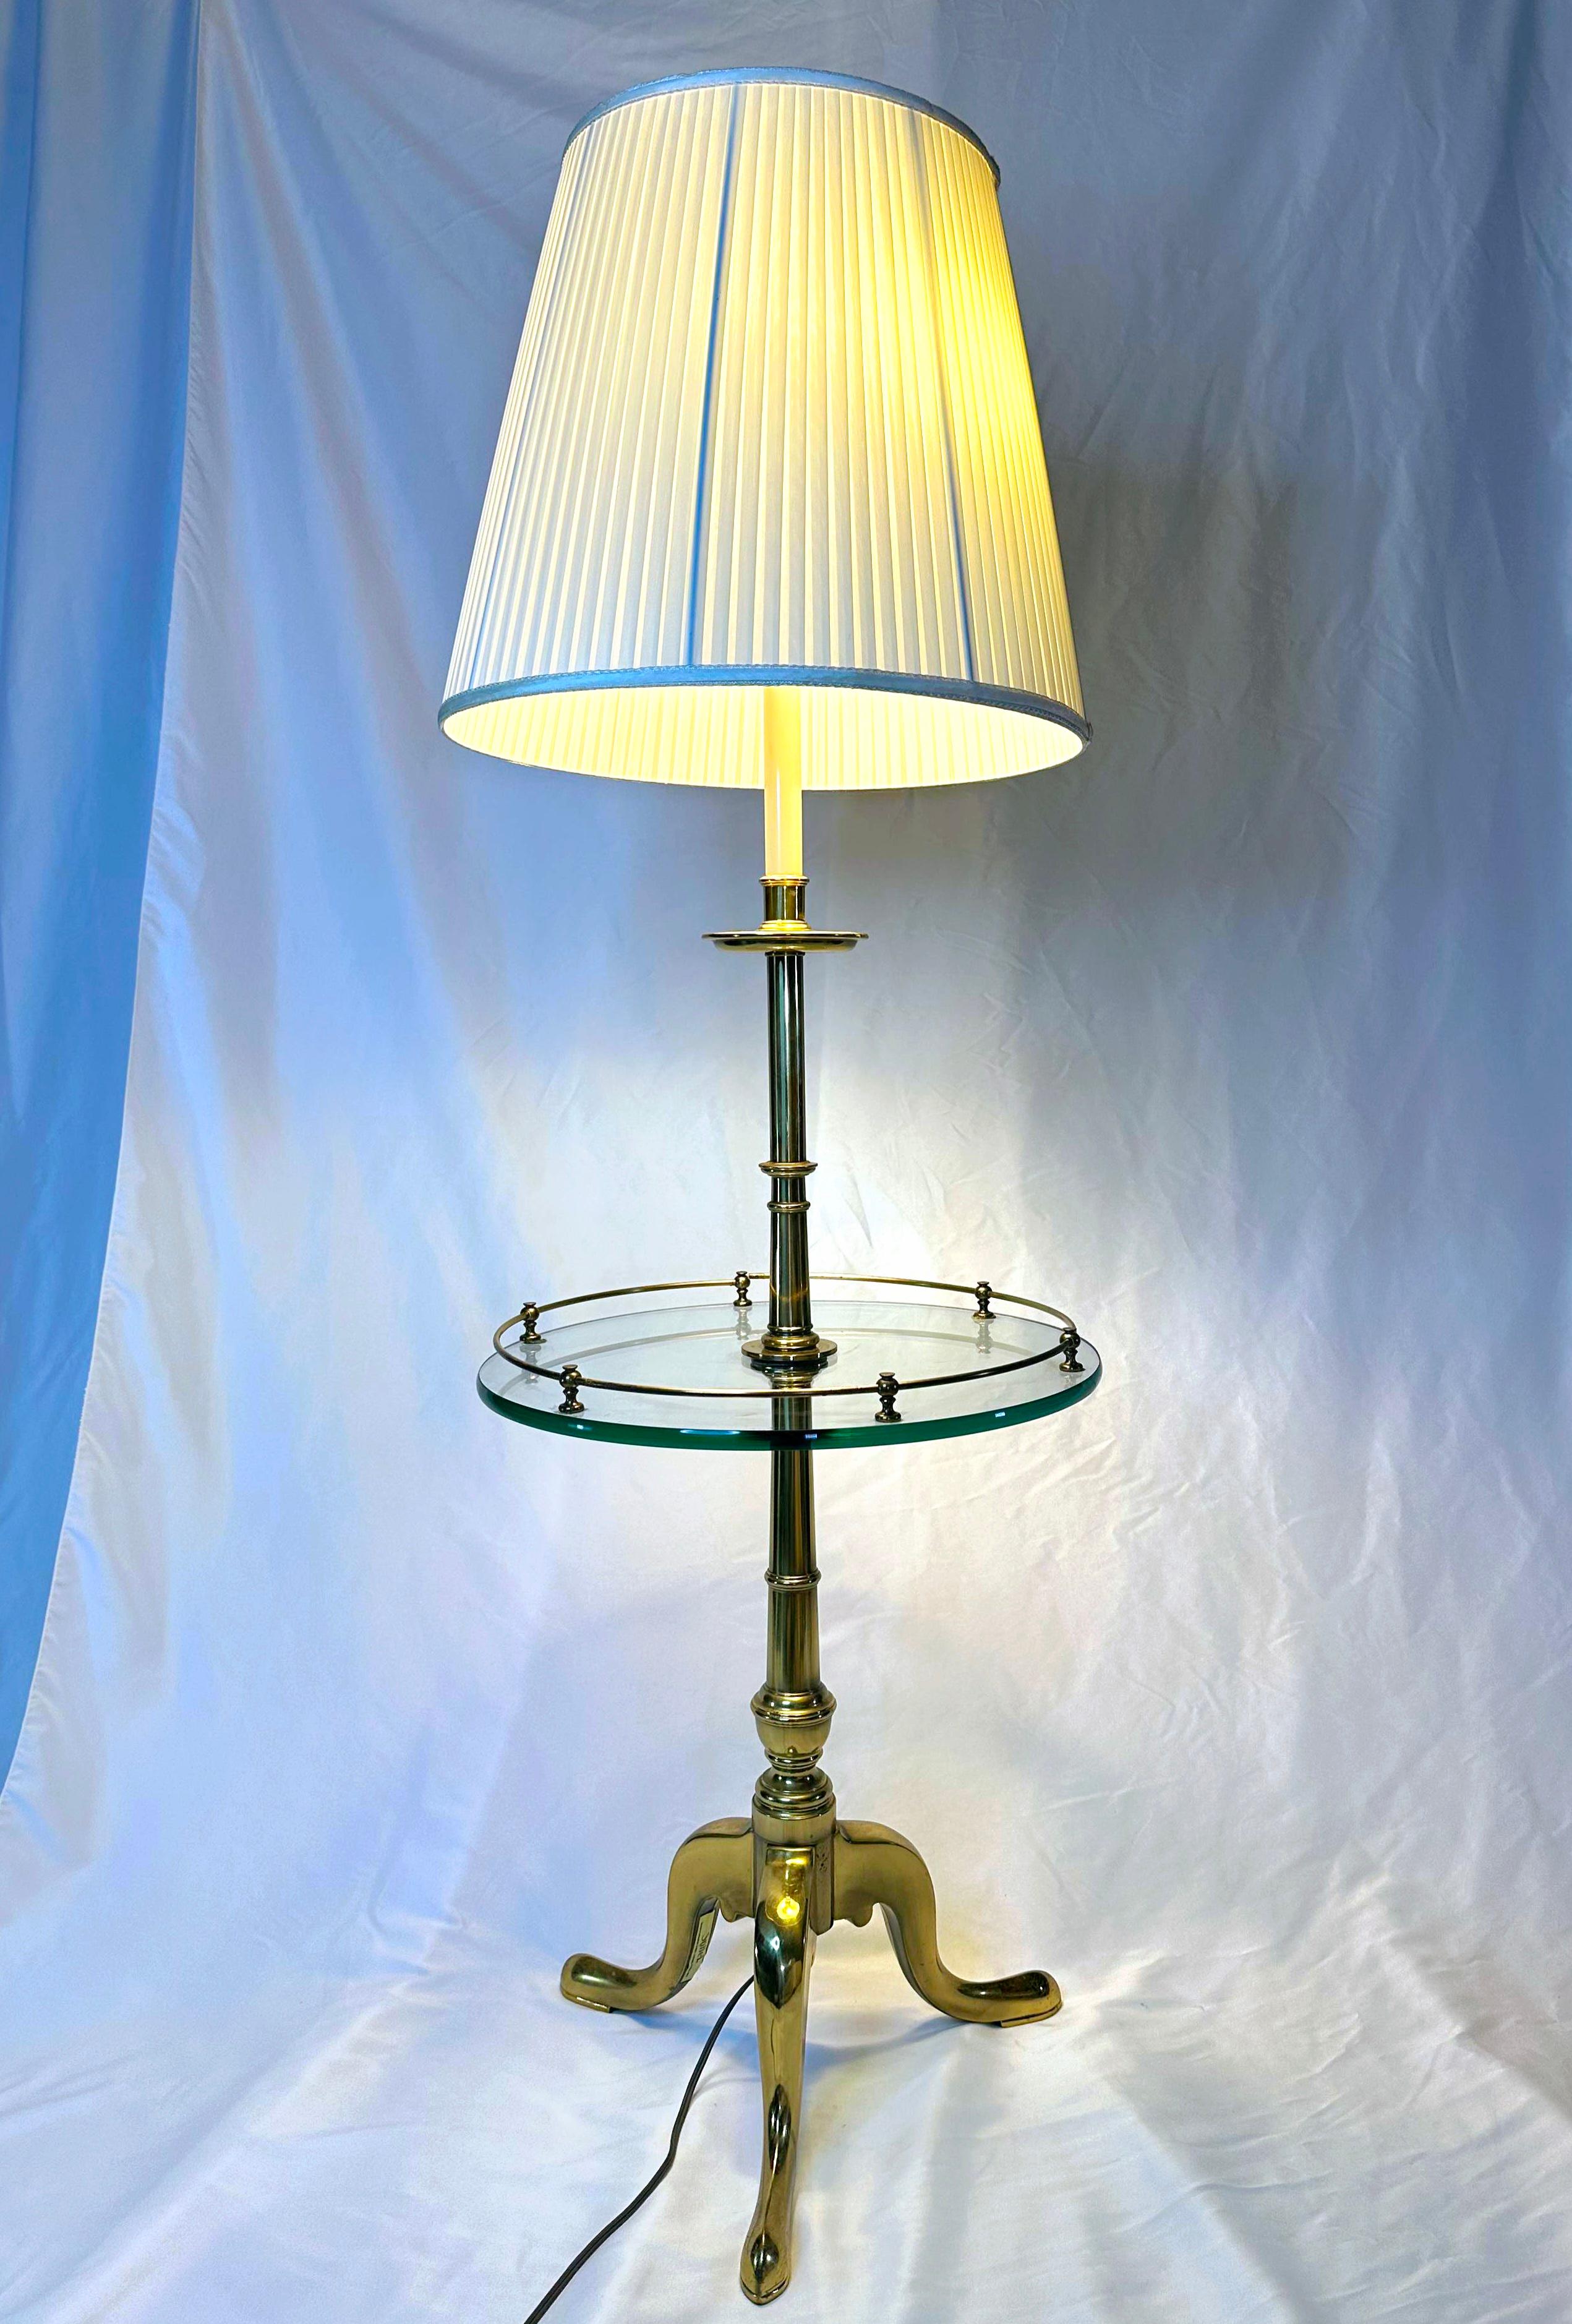 French Provincial Stiffel Floor Lamp With Glass Table and tripod legs For Sale 2